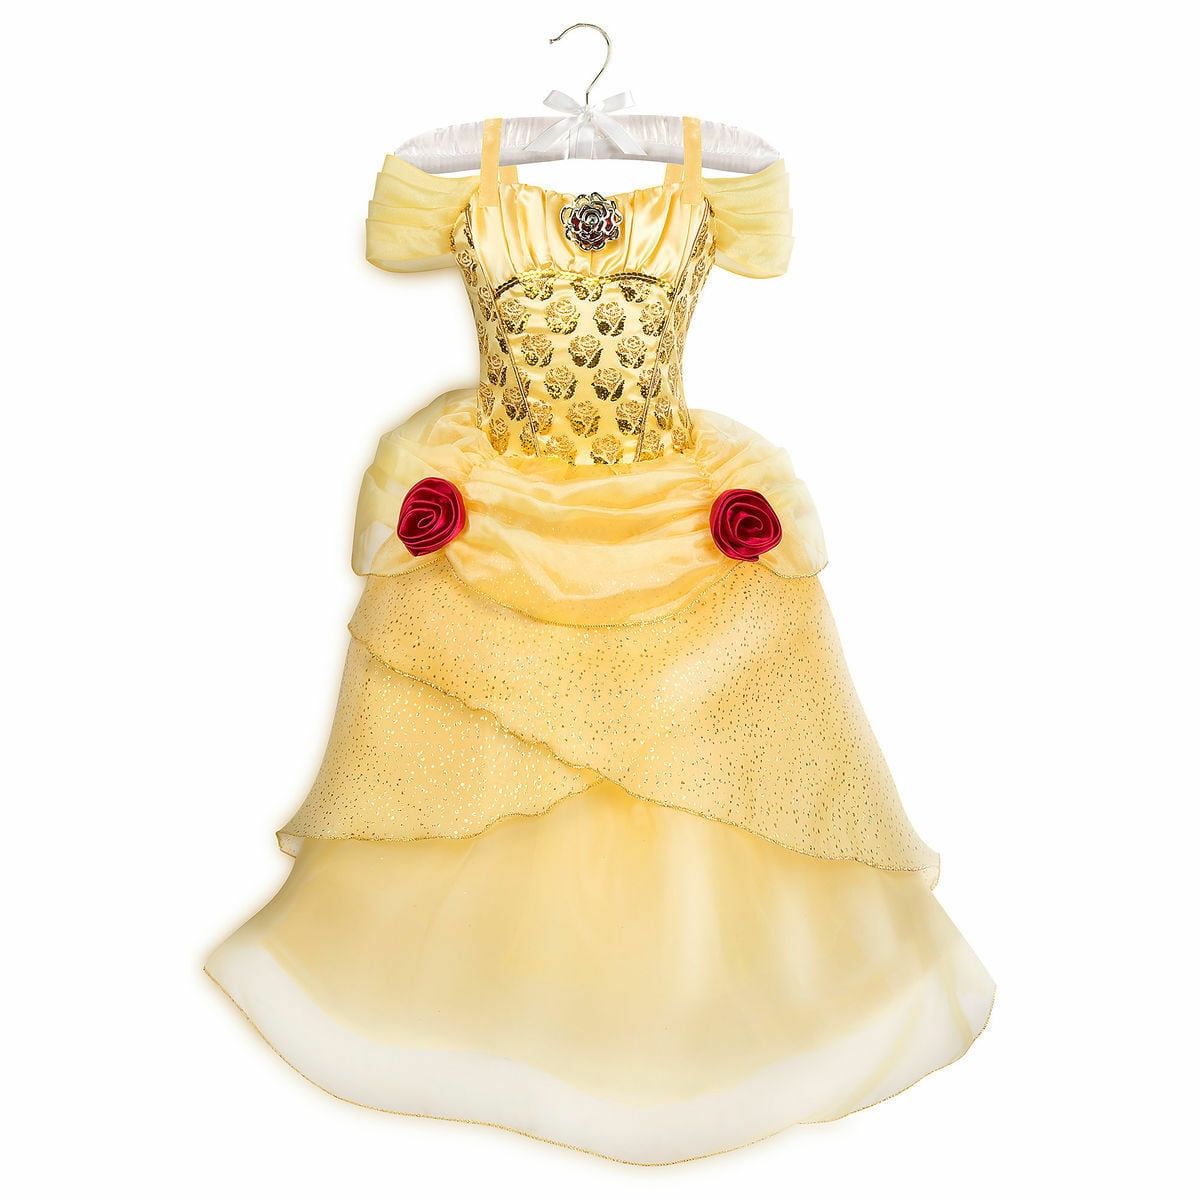 Girls Belle Costume Beauty and the Beast Princess Kids Pleated Party Fancy Dress 